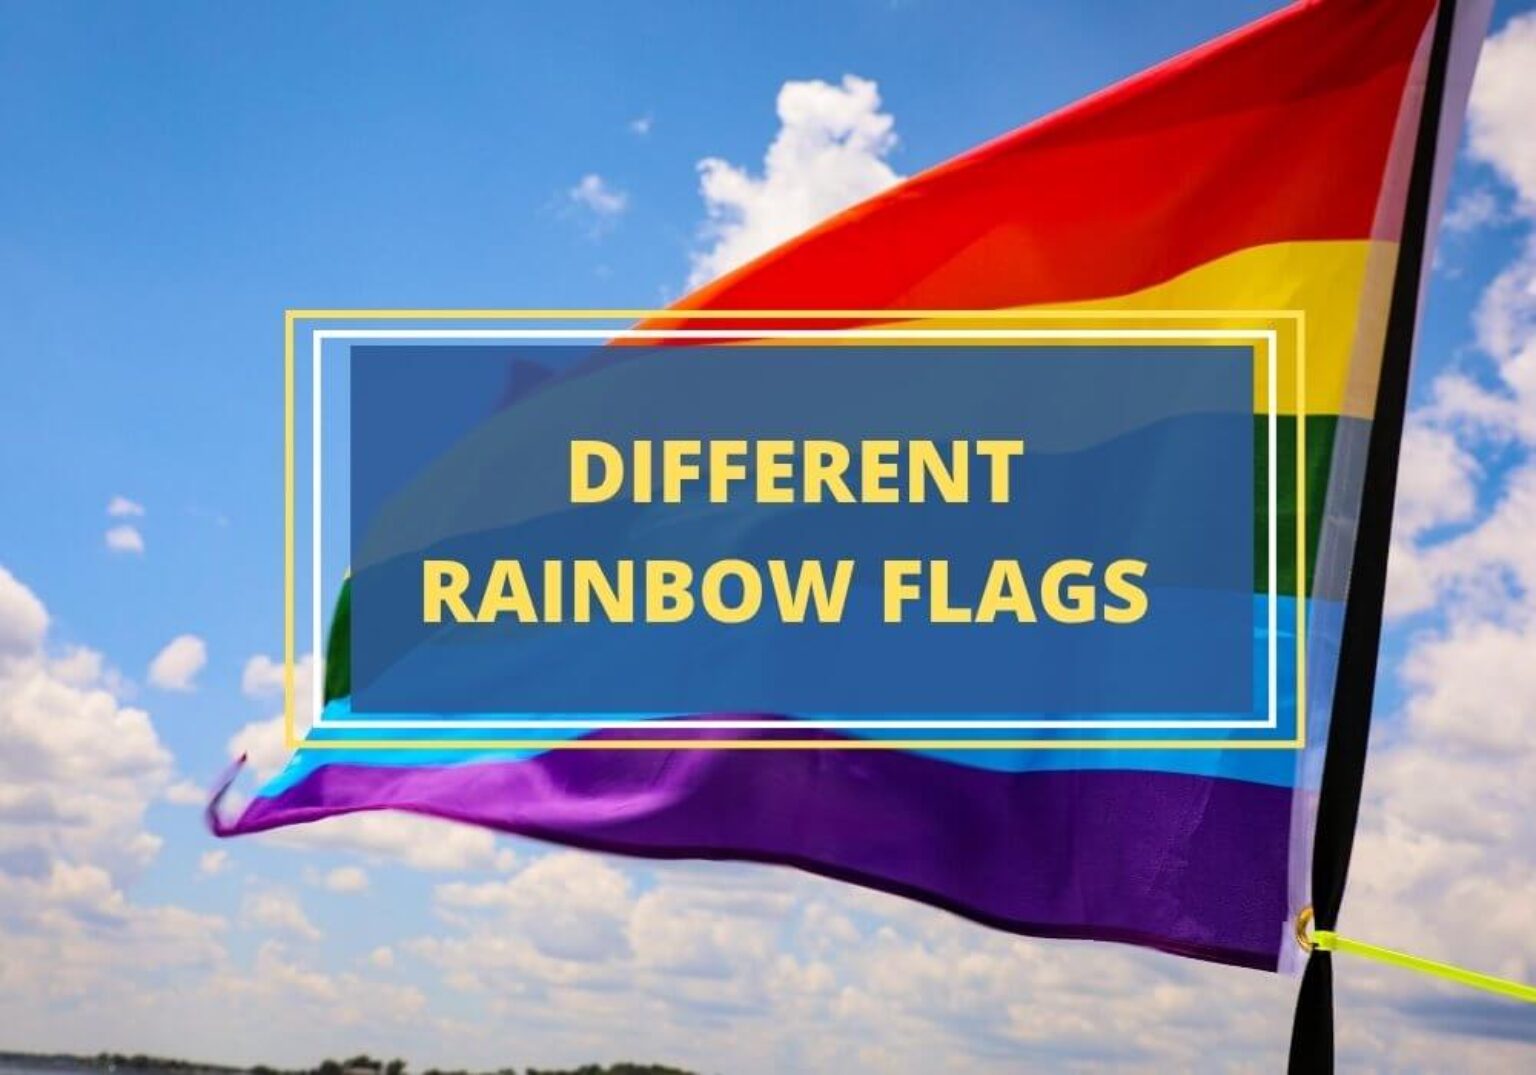 where does the rainbow flag come from